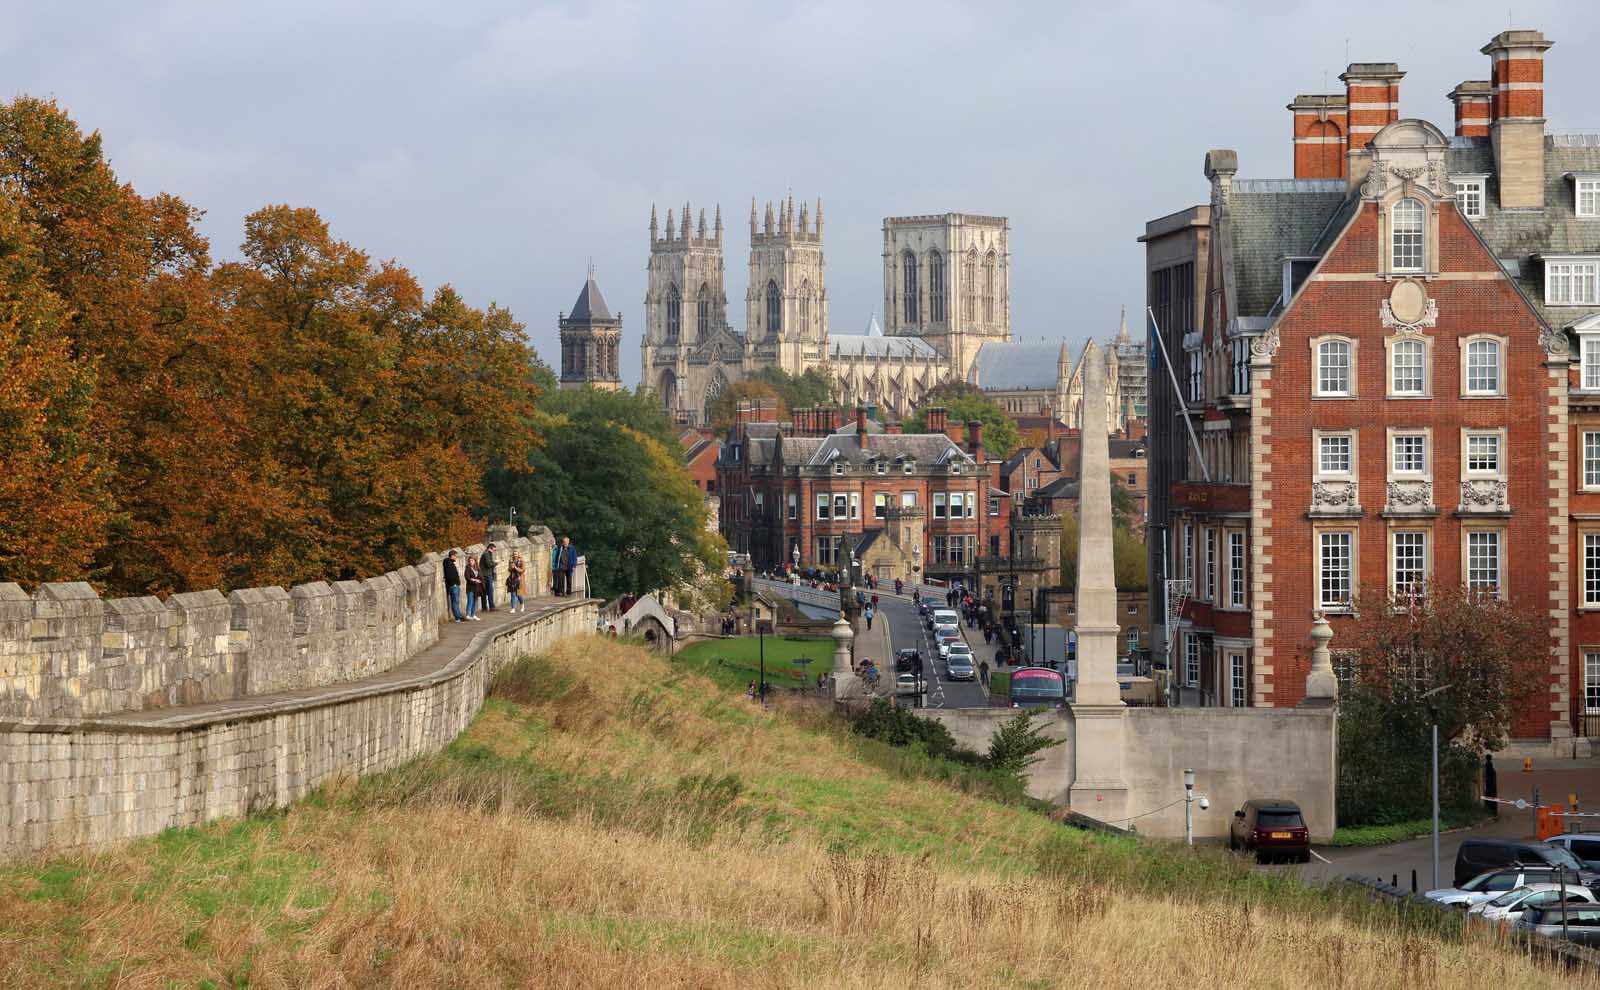 City of York in England